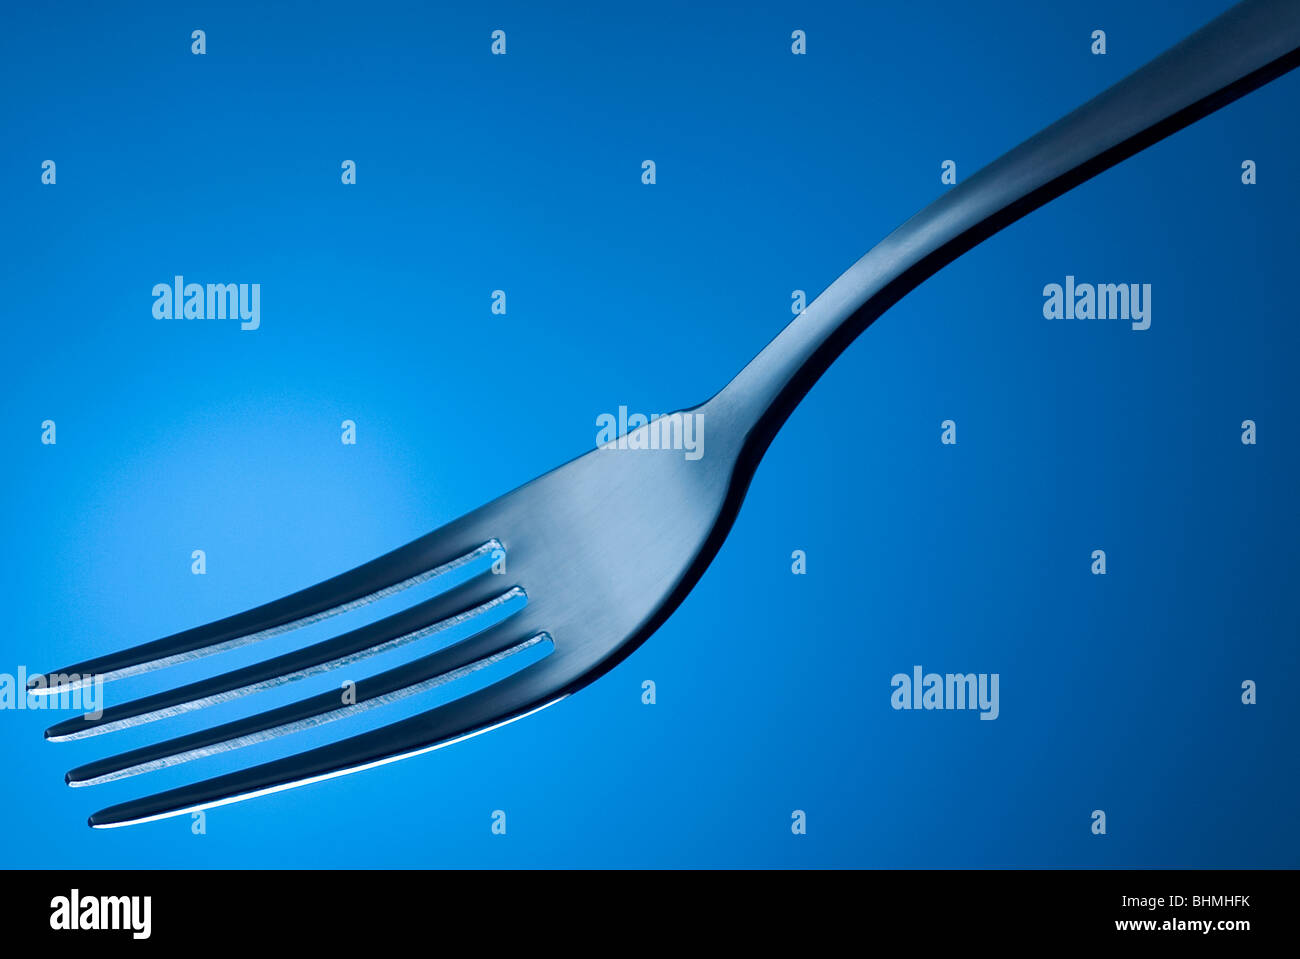 Stainless steel fork against a blue background. Stock Photo